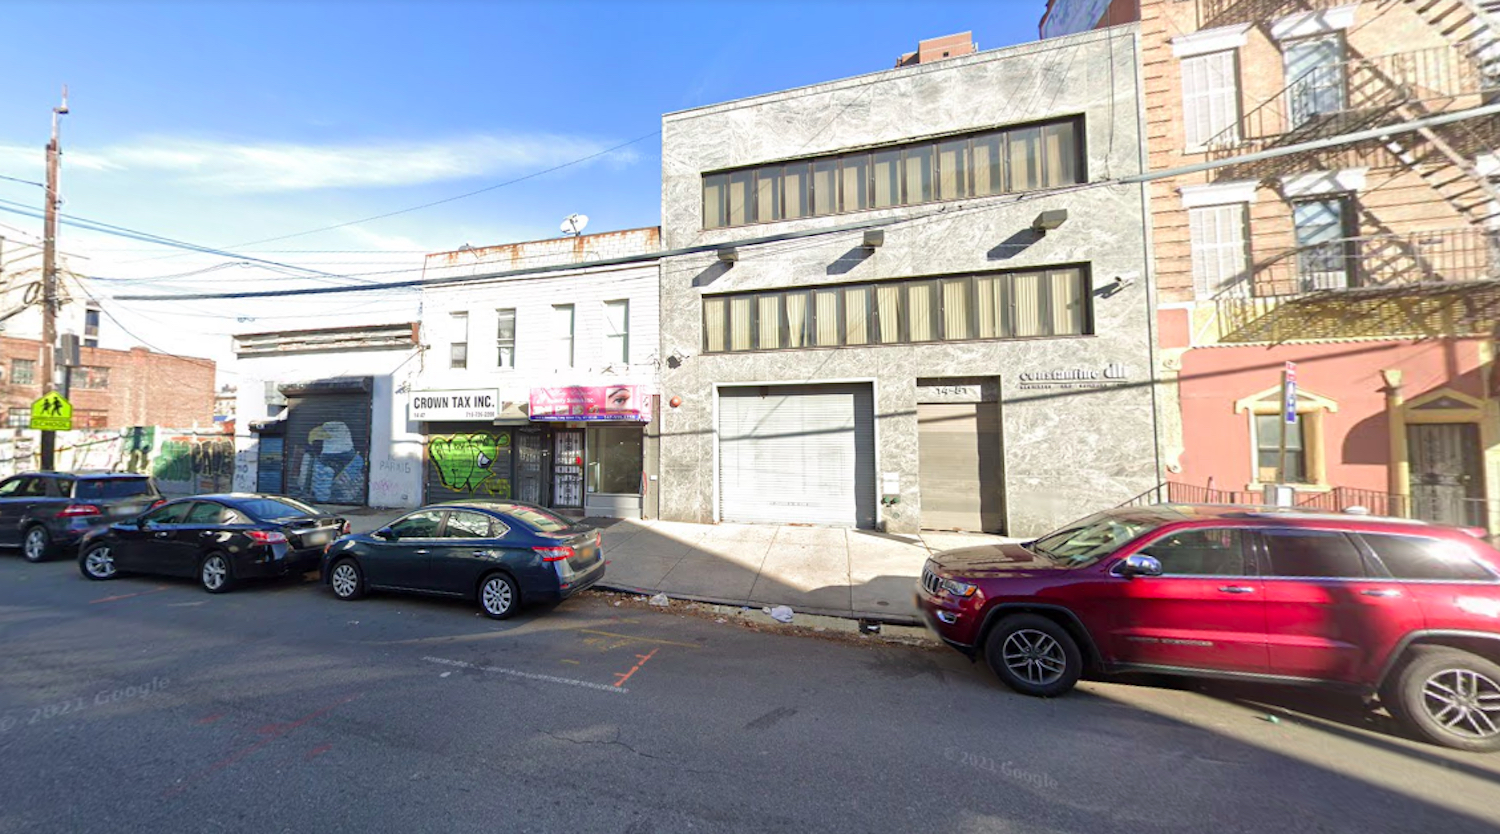 Permits Filed For Mixed-Use Building At 14-47 Broadway In Astoria, Queens